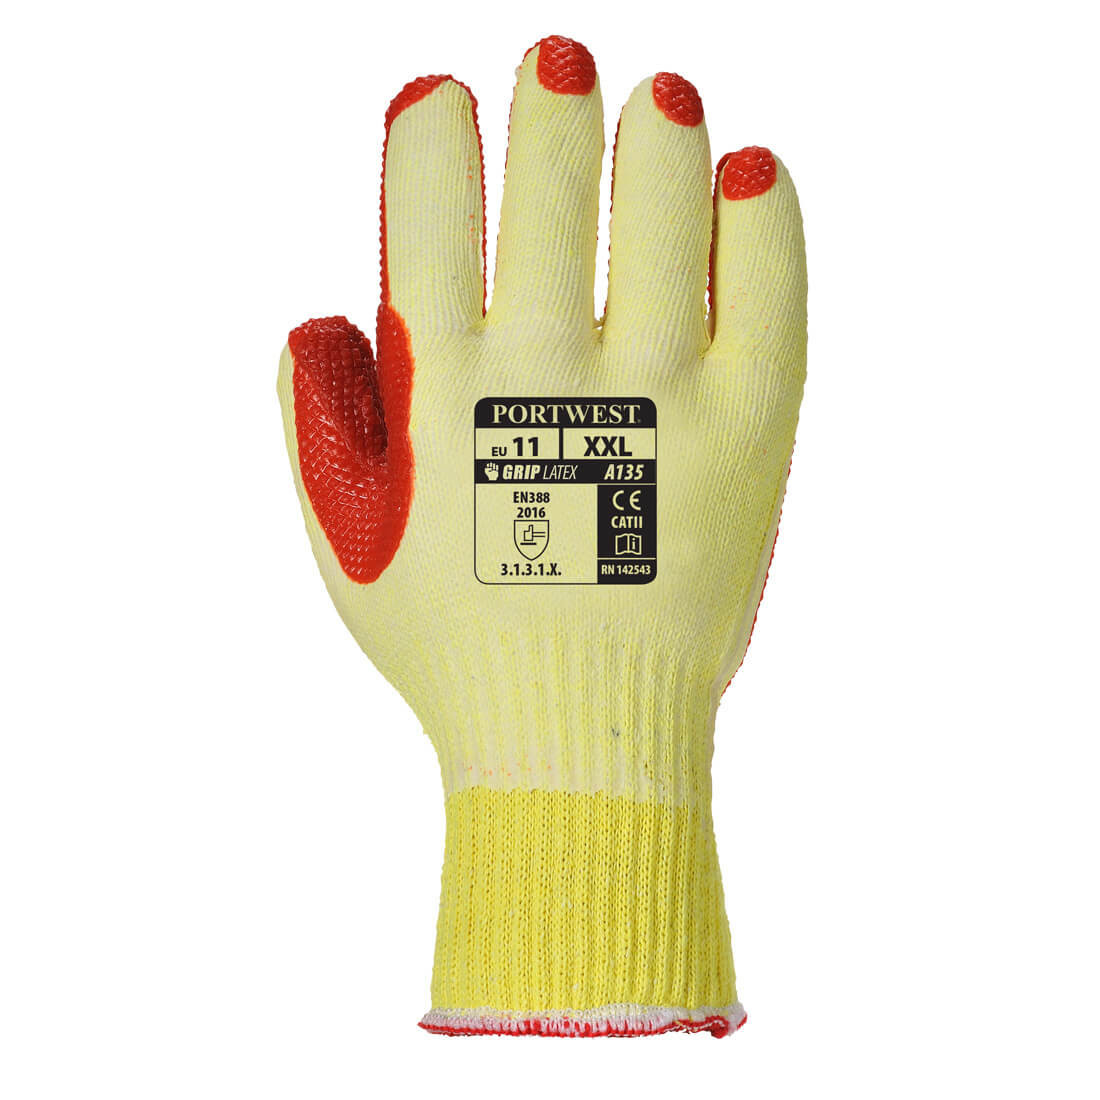 Tough Grip Glove - Personal protection